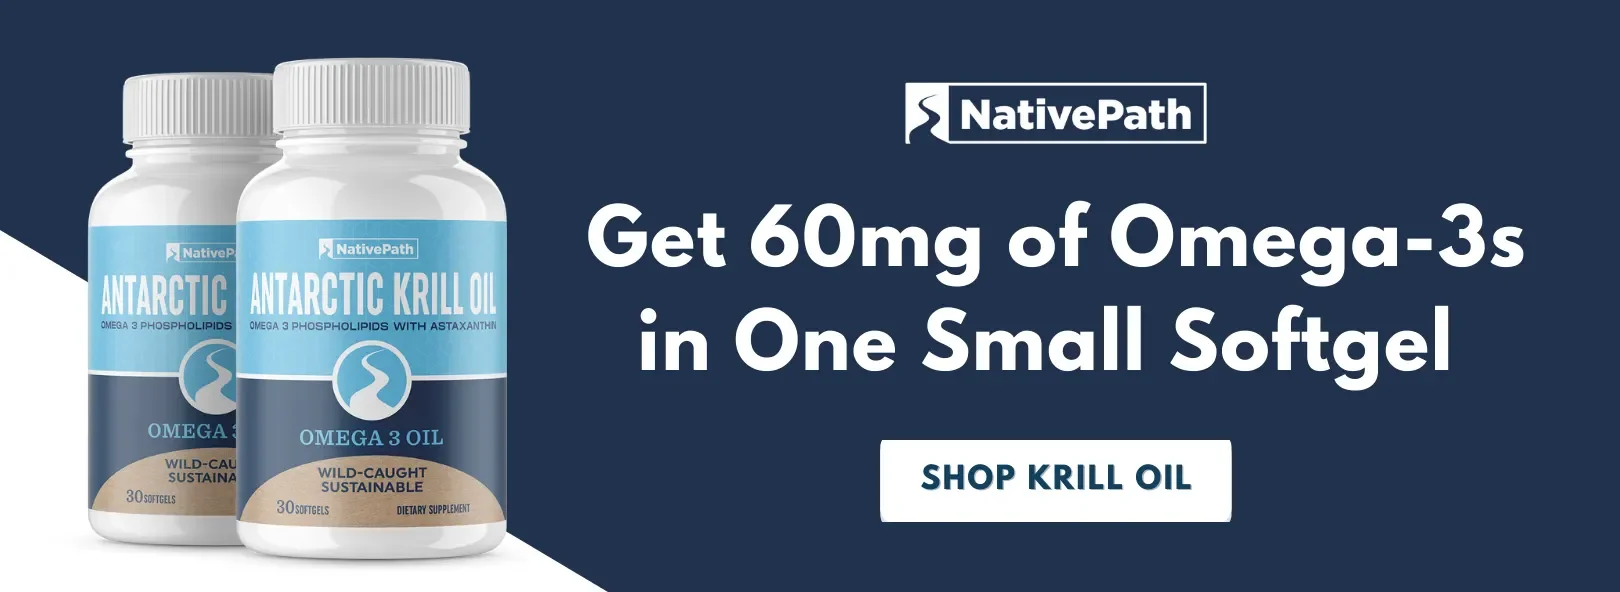 Get 60mg of Omega-3s in One Small Krill Oil Softgel